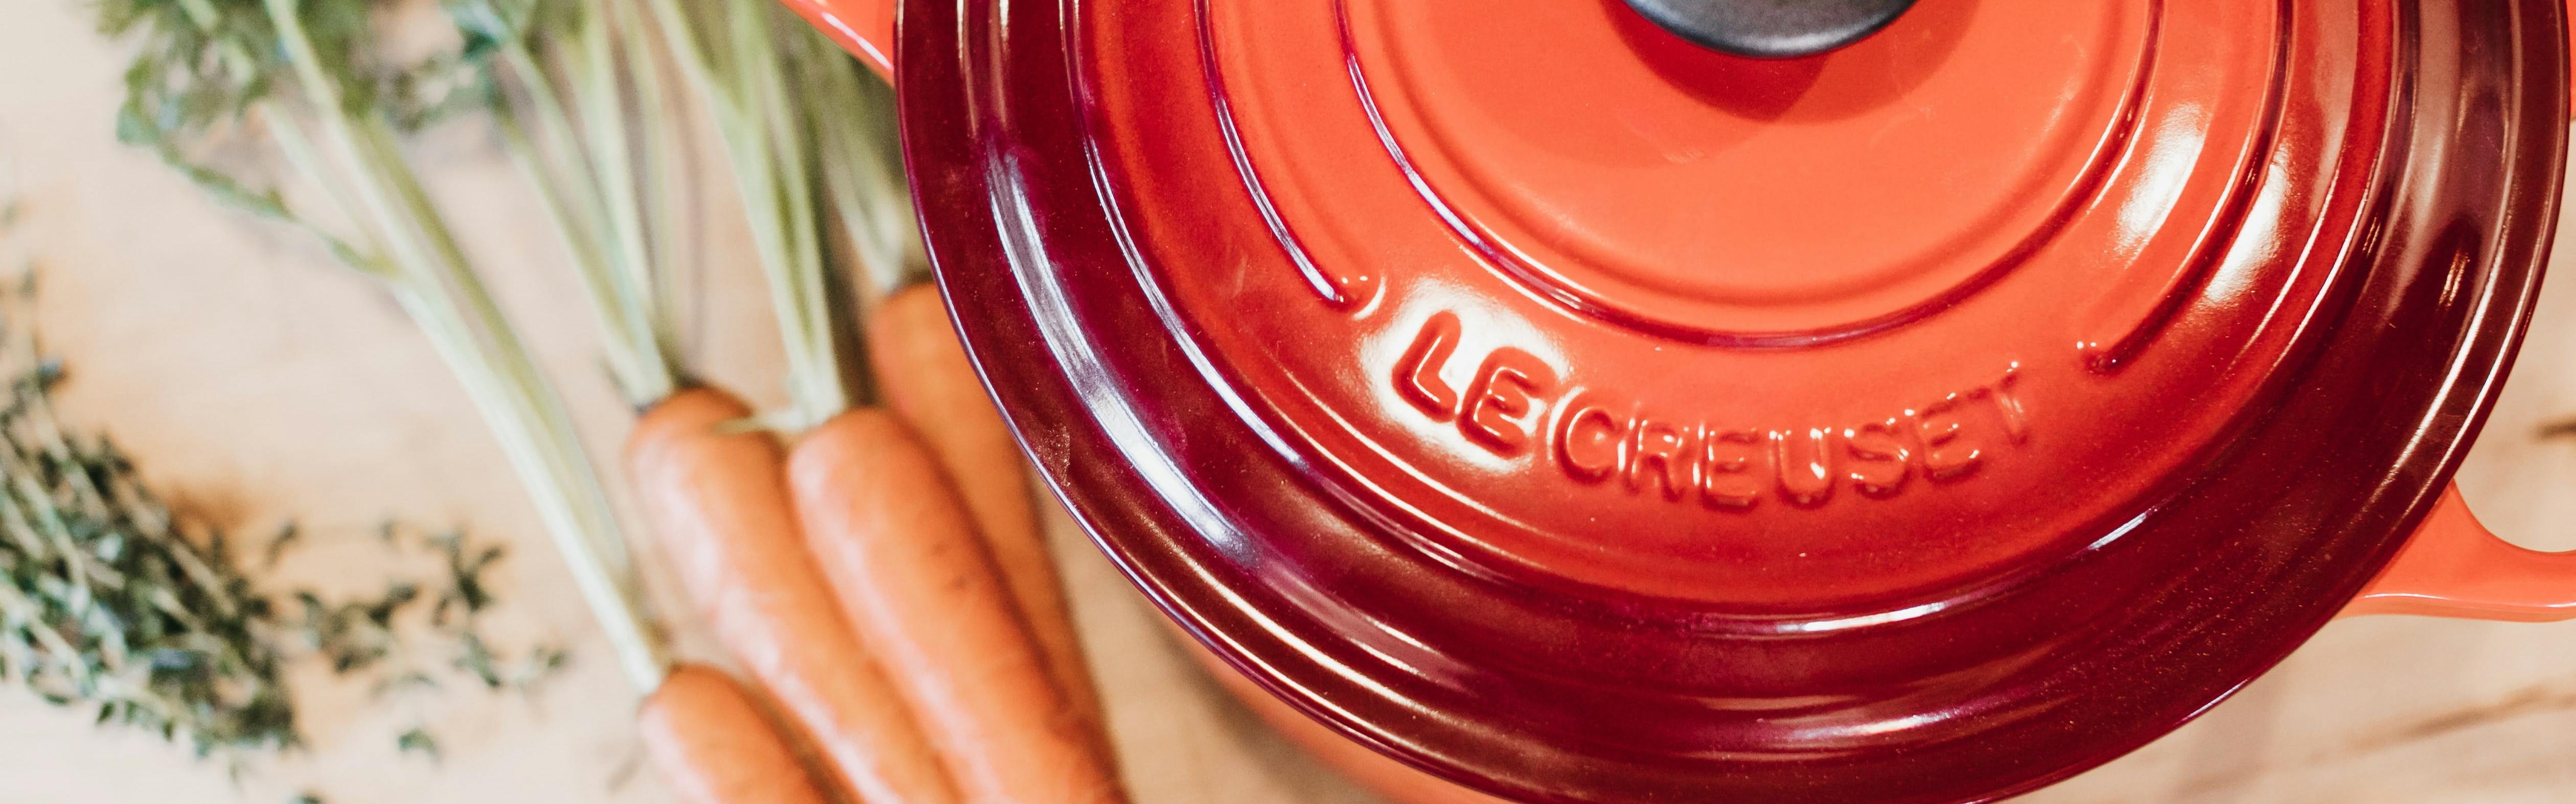 Le Creuset Signature Dutch Oven in the kitchen.